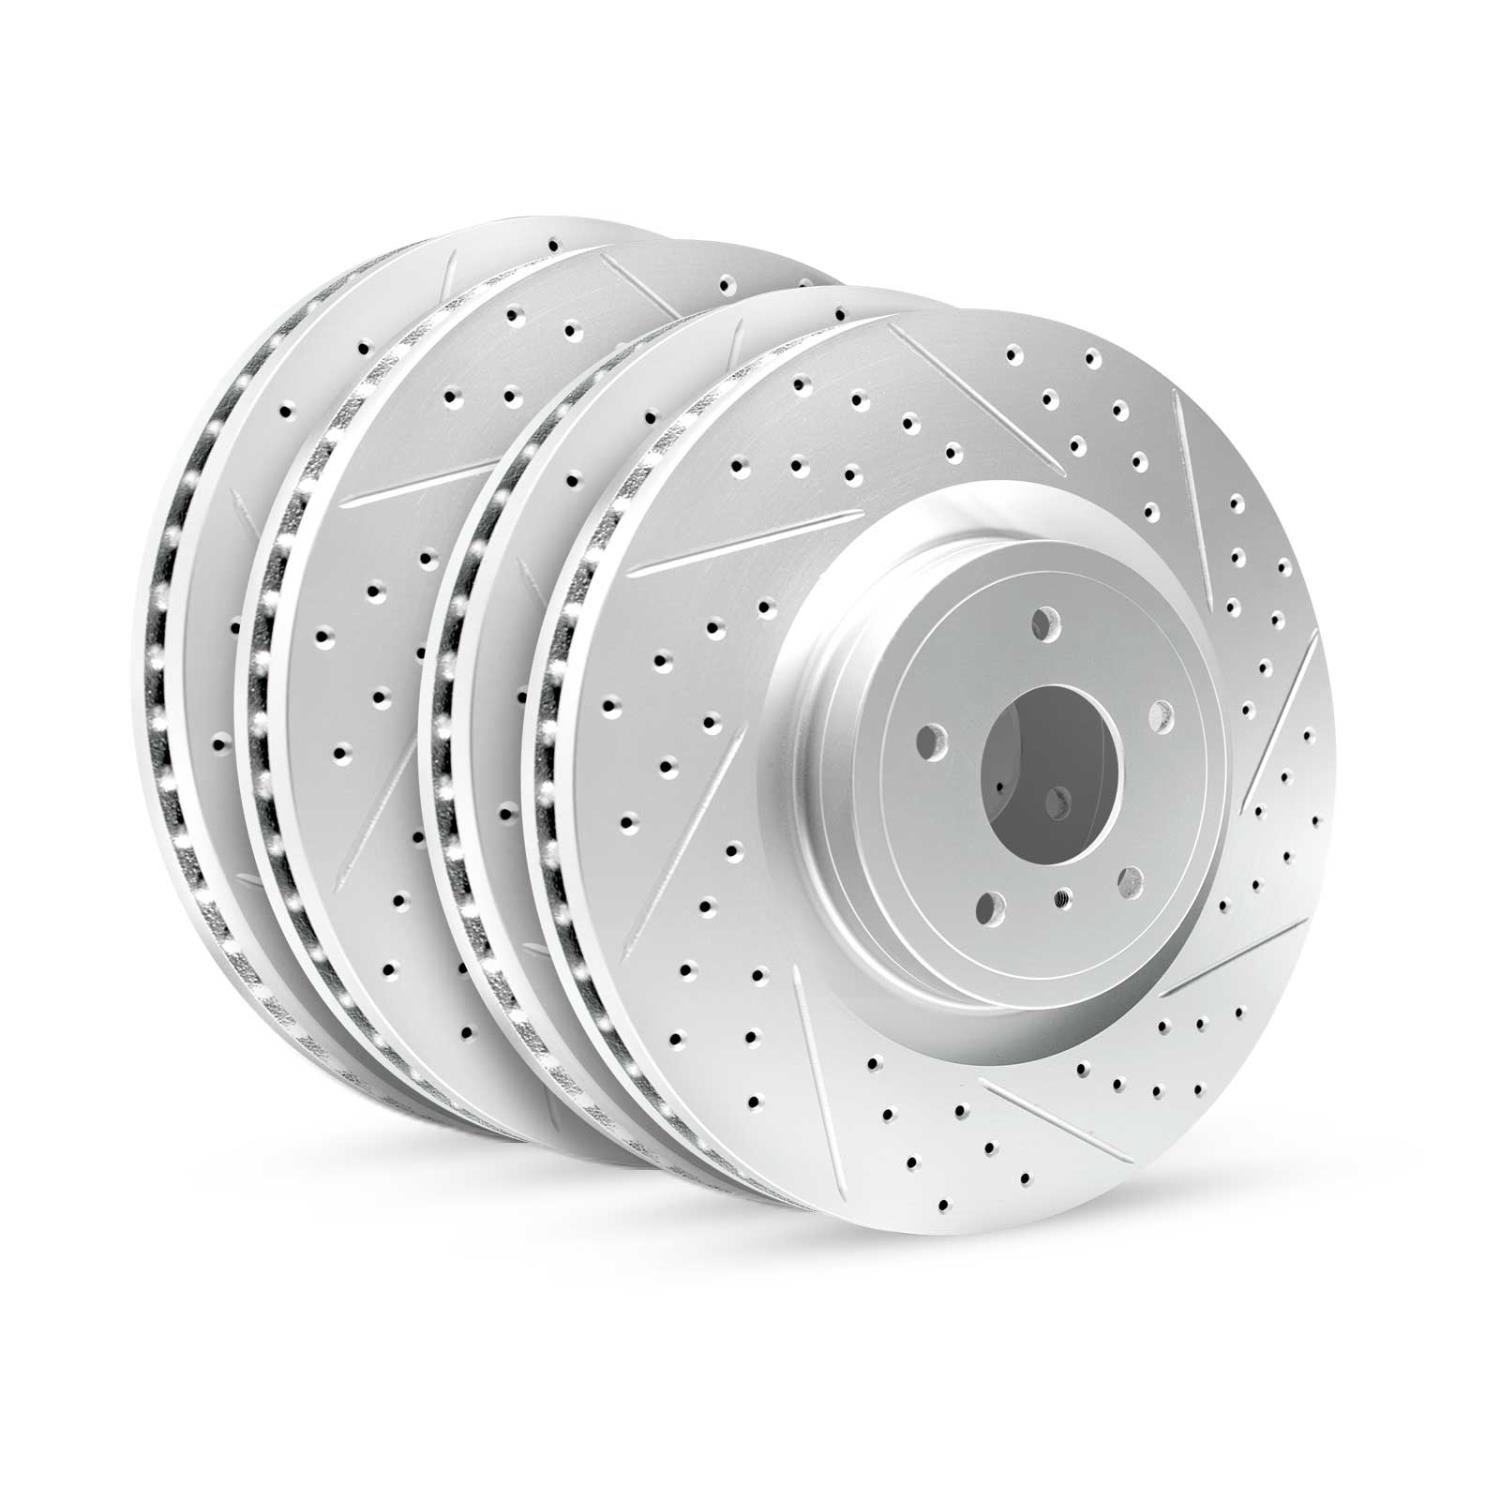 GEO-Carbon Drilled/Slotted Rotors, 2014-2021 BMW, Position: